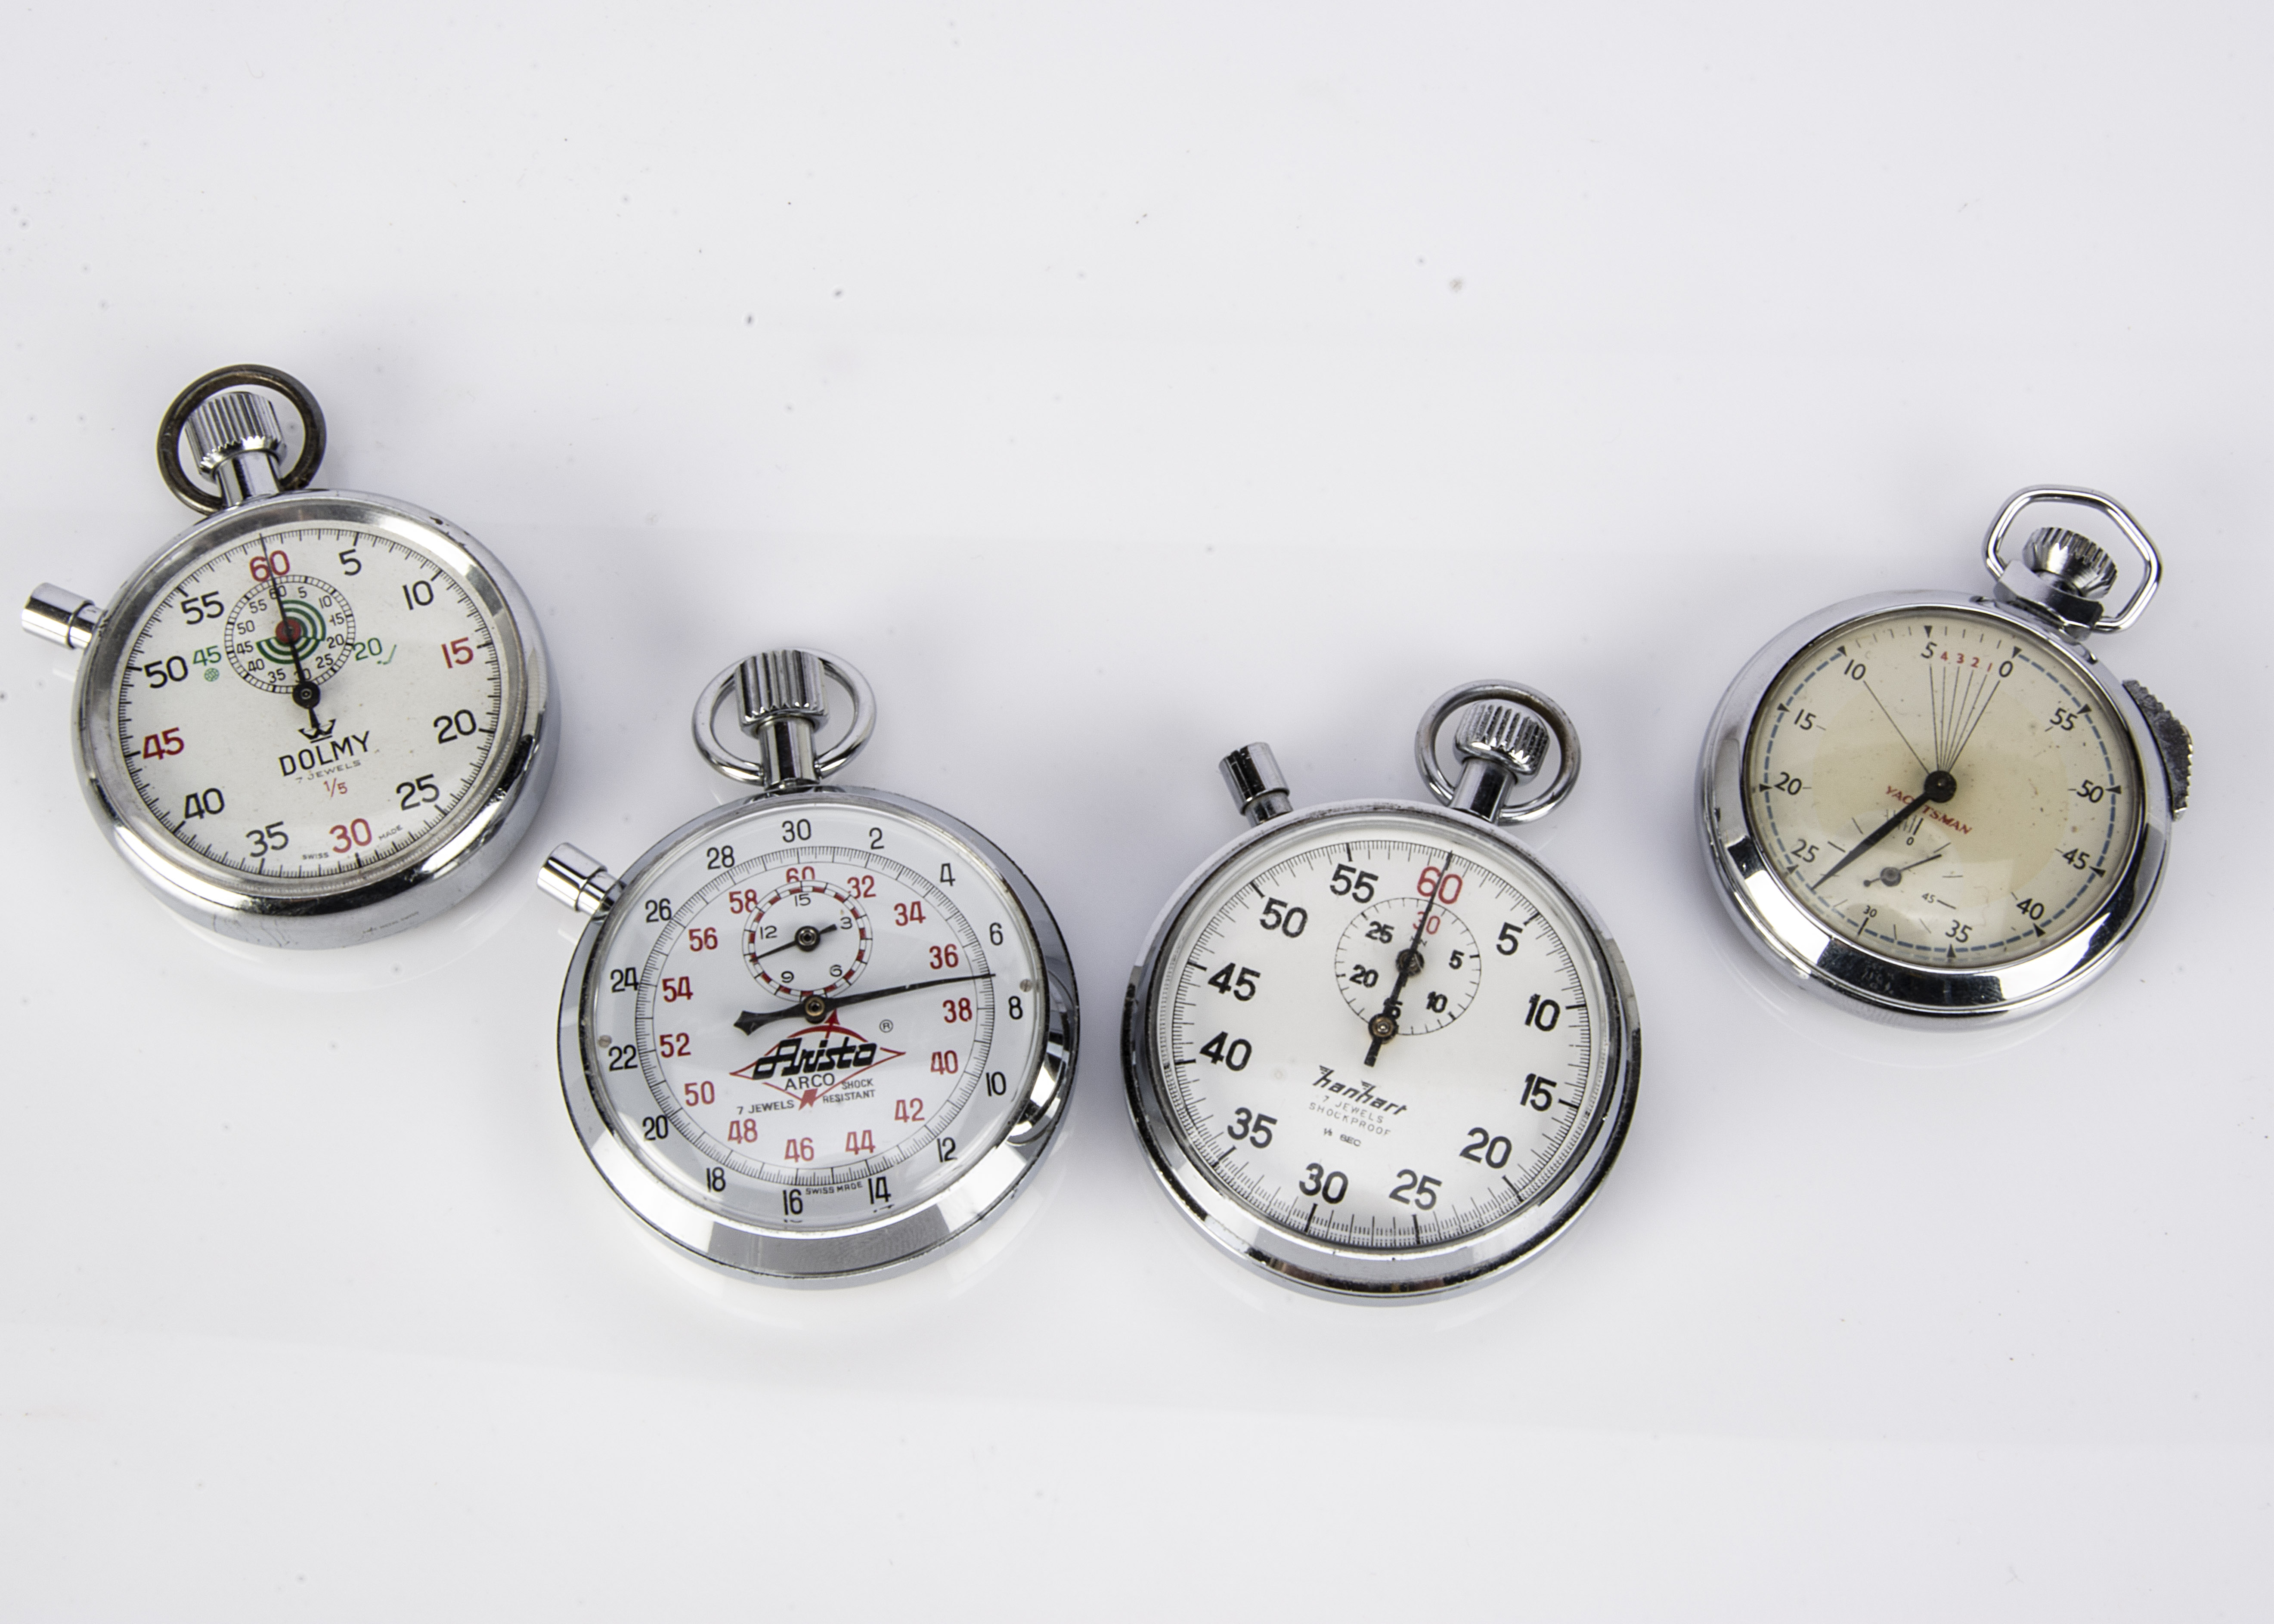 Four vintage stopwatches, including an Arista, an Hanhart, a Dolmy and a Yachtsman, alla appear to